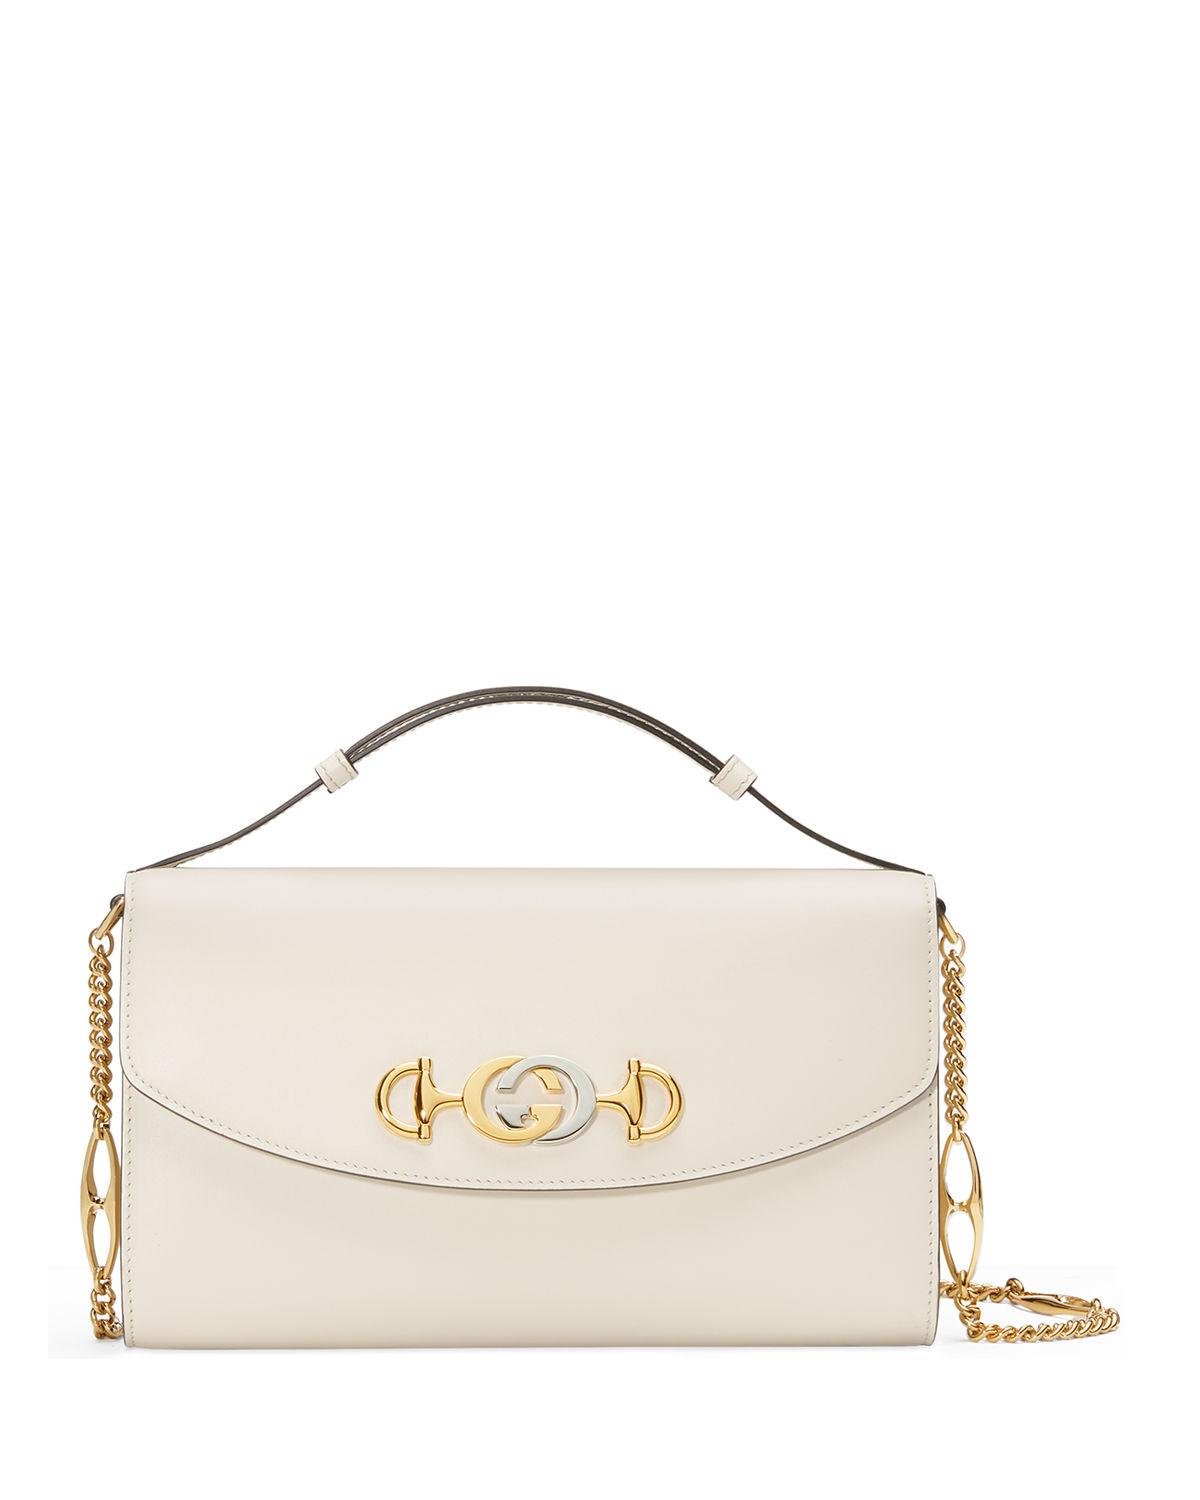 Gucci Zumi Smooth Leather Shoulder Bag in White - Lyst